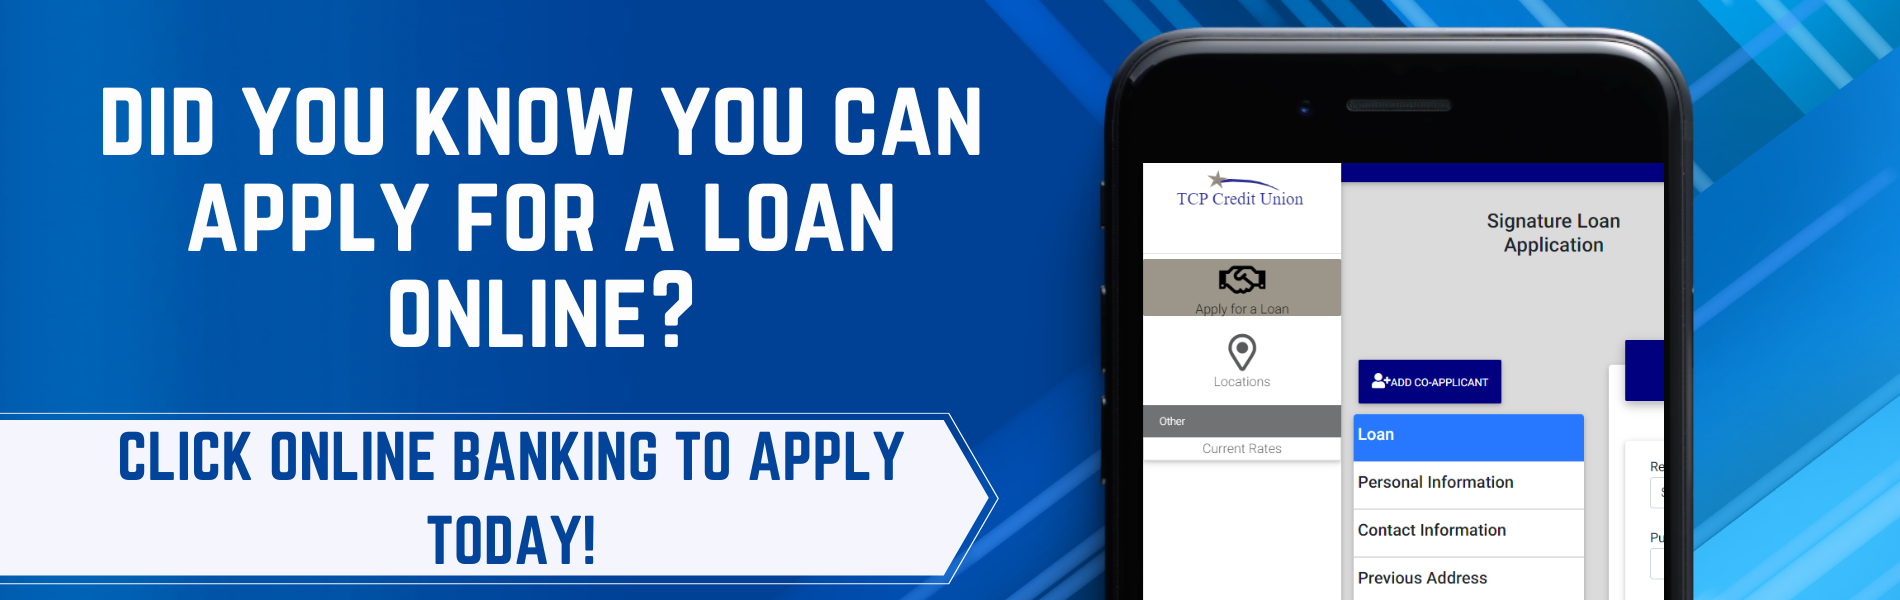 did you know you can apply for a loan online? 